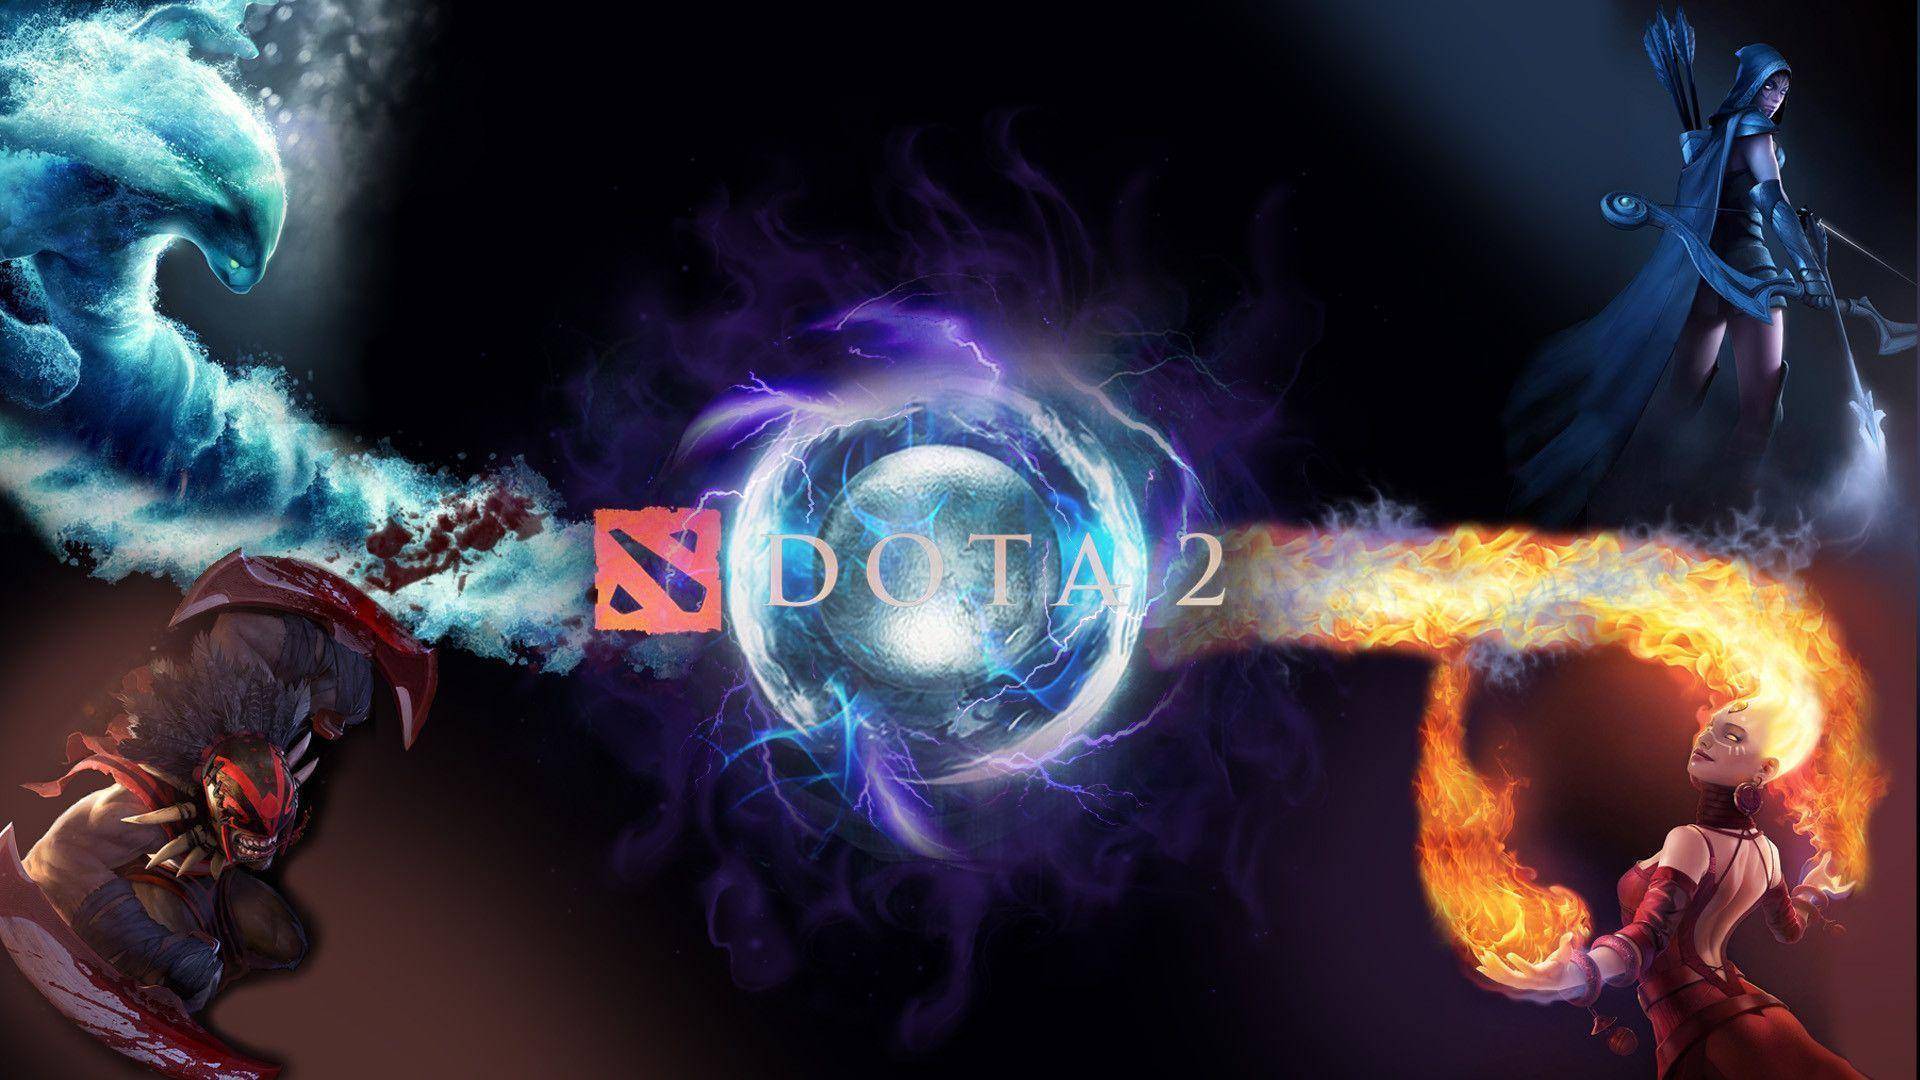 Dota 2 and the esports industry